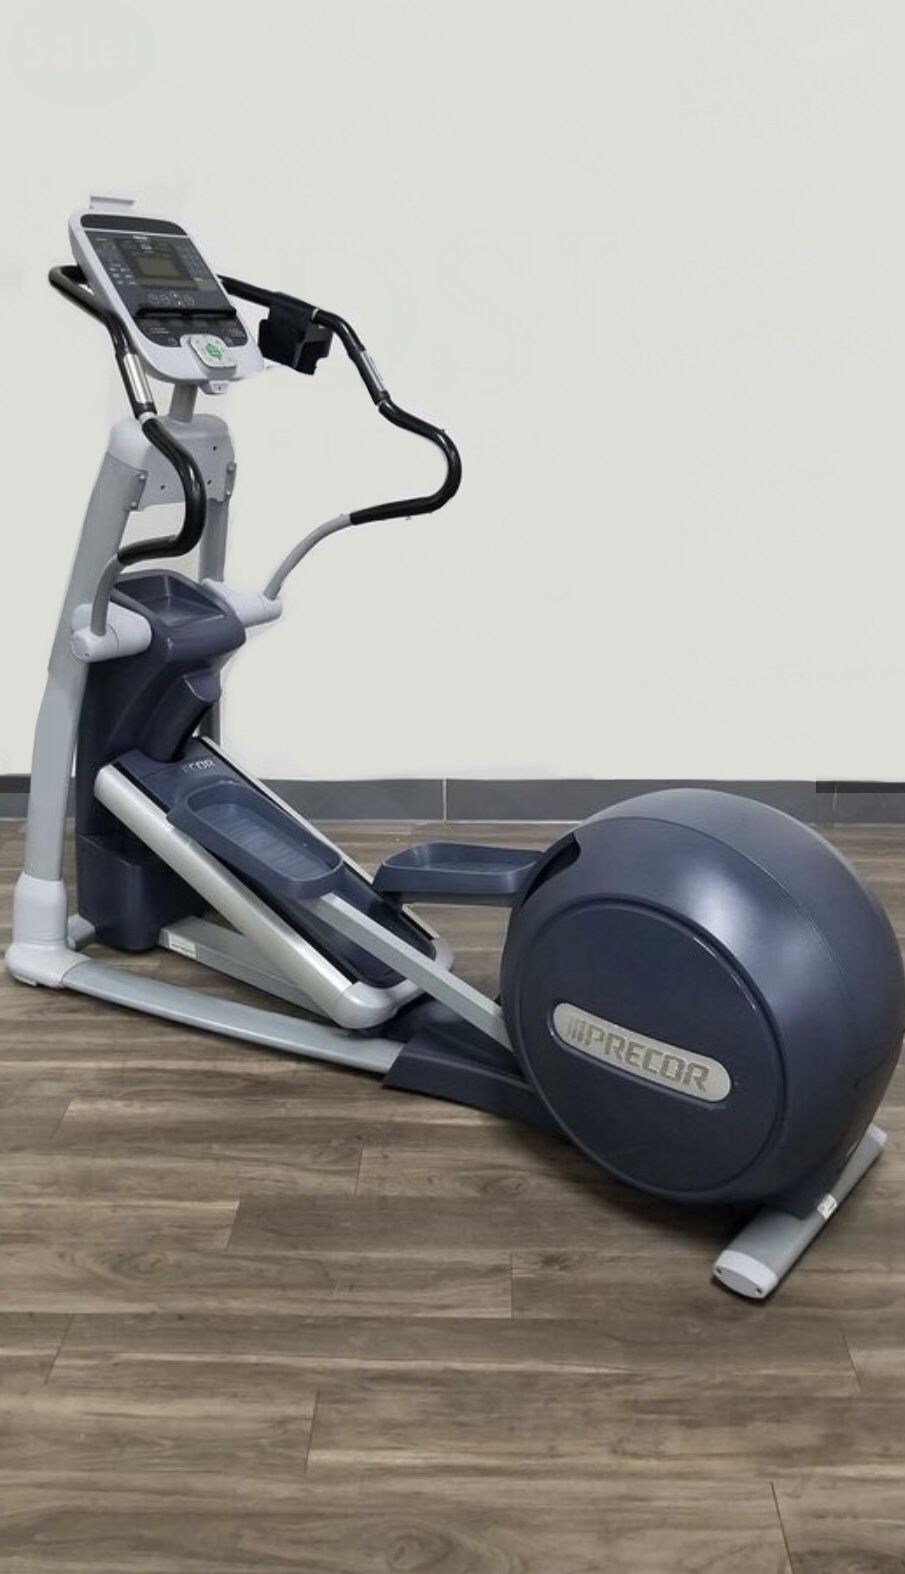 Precor Elliptical For Sale negotiable  Gym Mat Included 